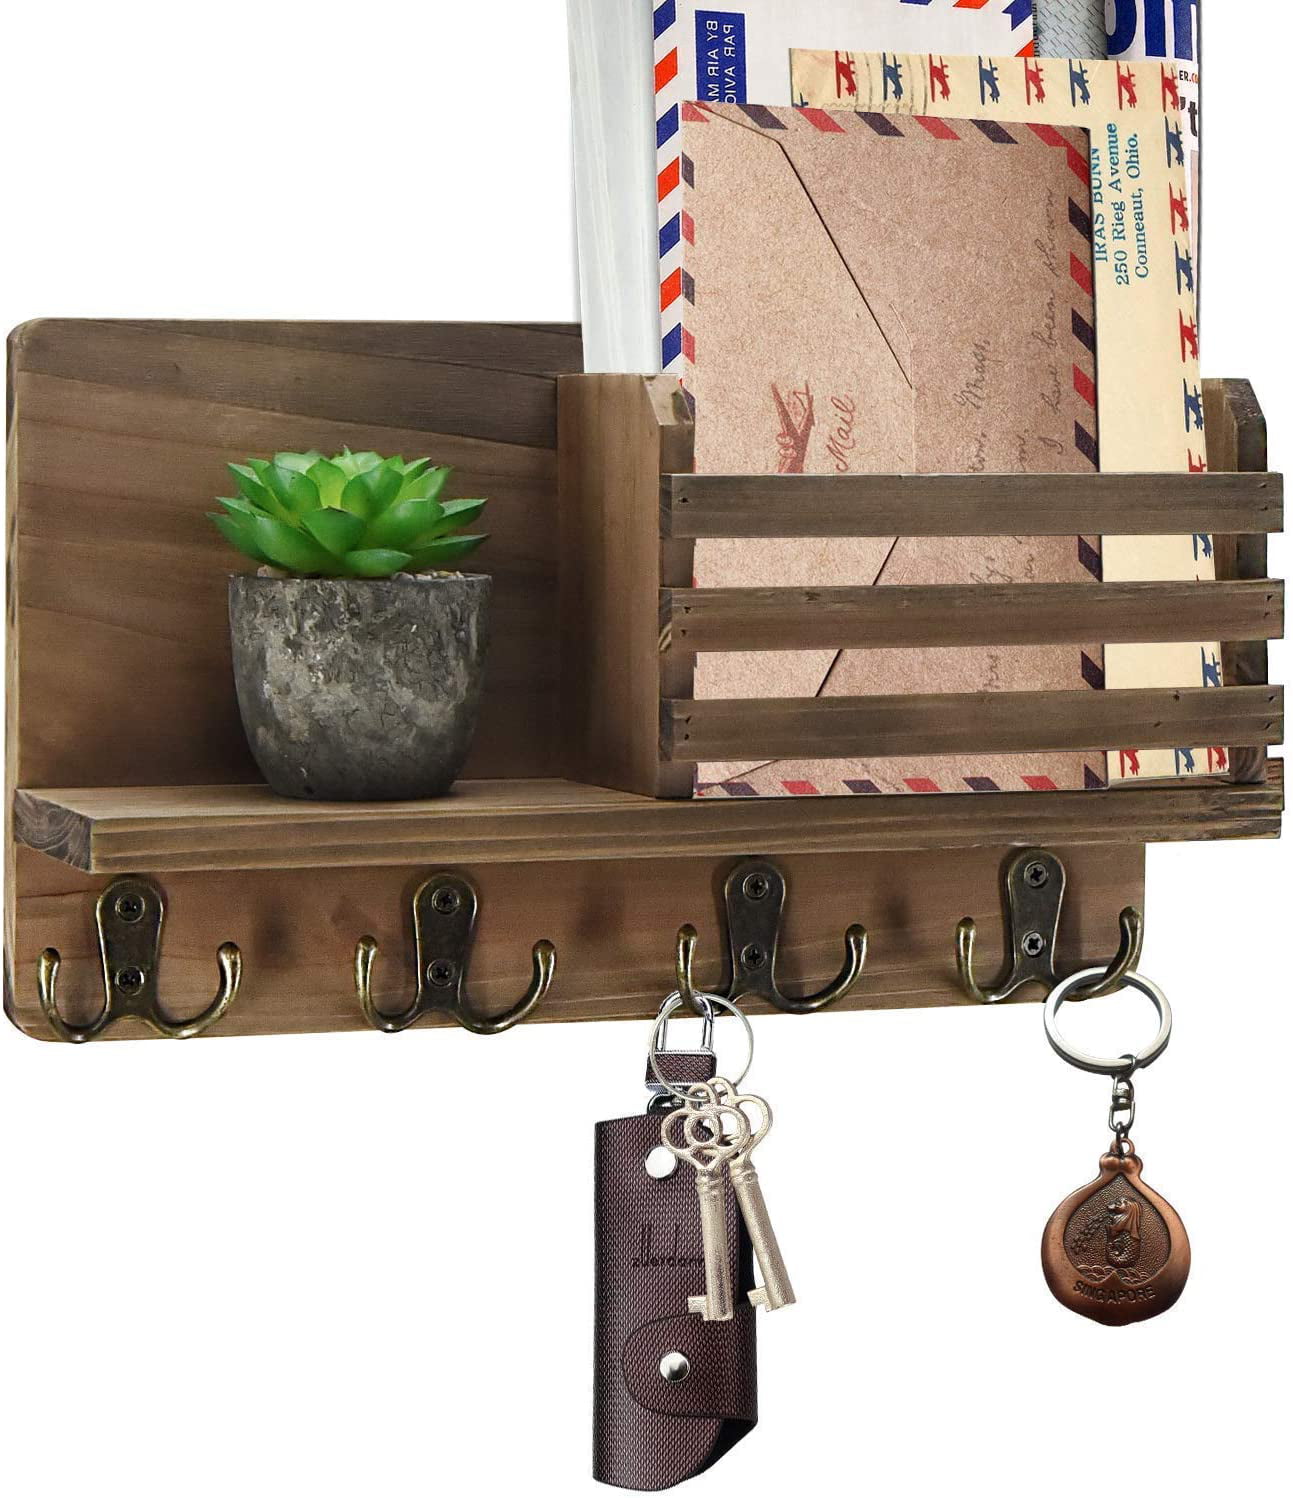 Mail Holder Organizer Wall Mounted Rustic Wood Mail Sorter with Key 8 Hooks 